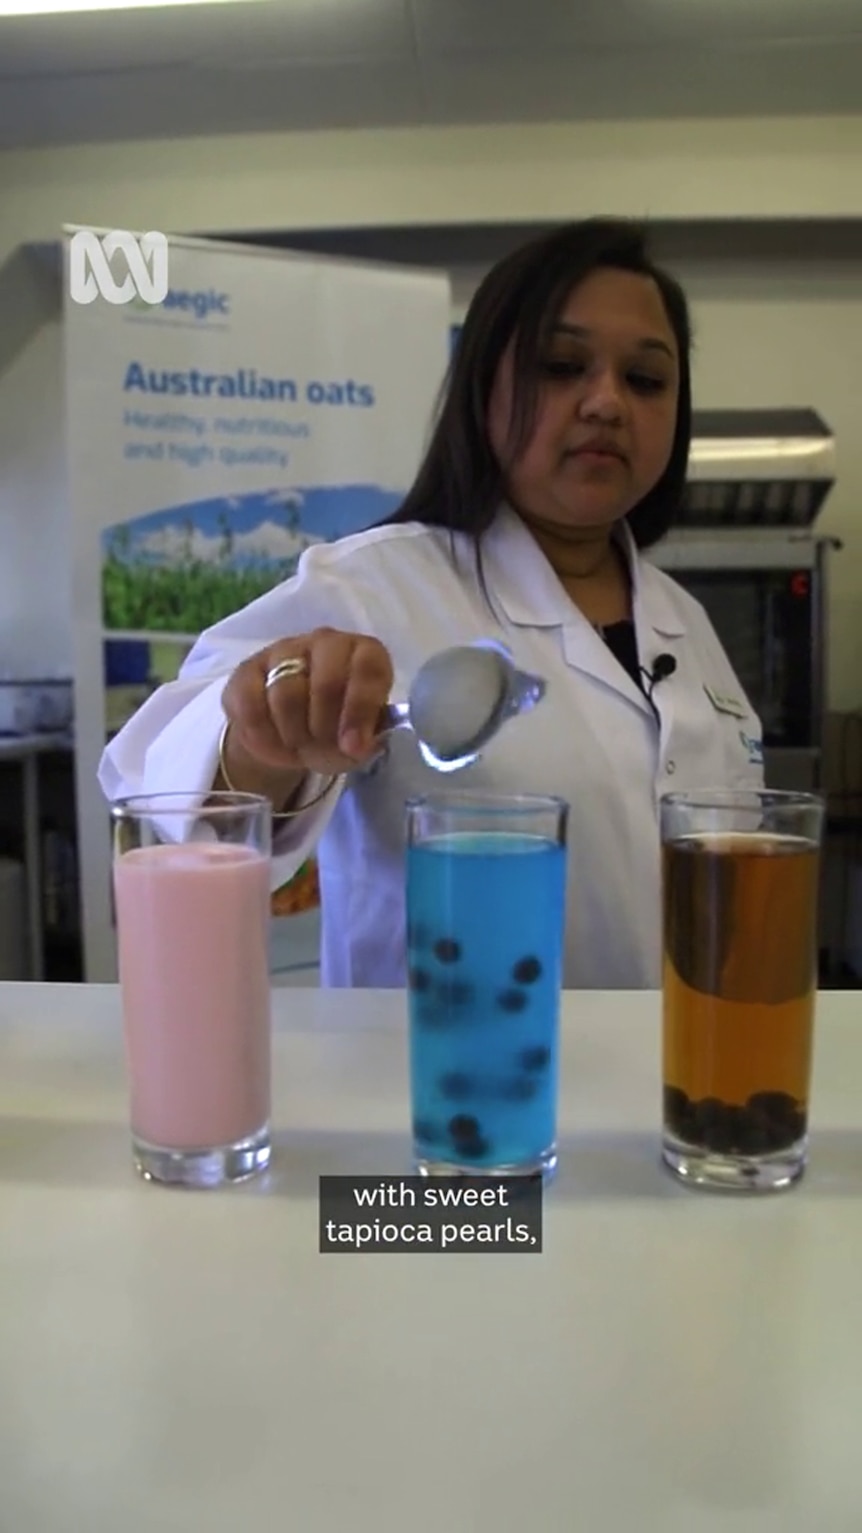 A woman with dark hair and dark-tone skin in a white coat pours something into a glass filled with blue liquid and small balls